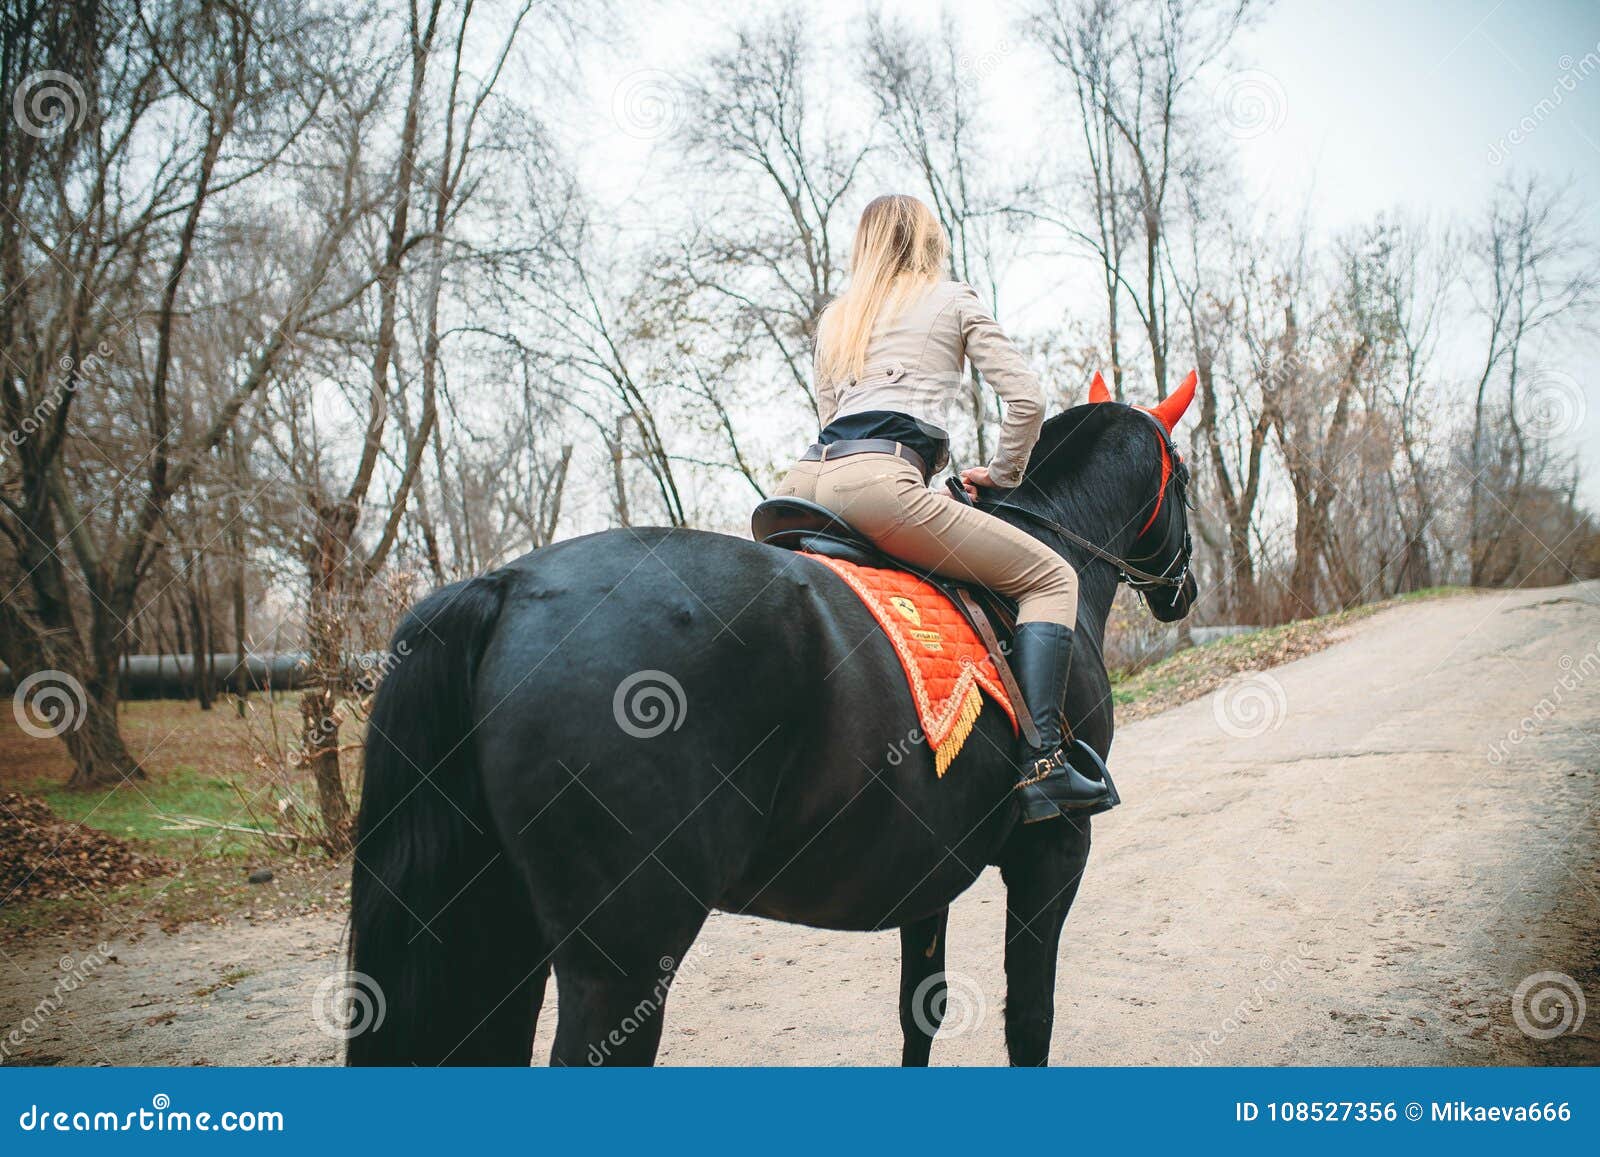 Beautiful Young Blonde Woman Riding A Horse Stock Photo Image Of